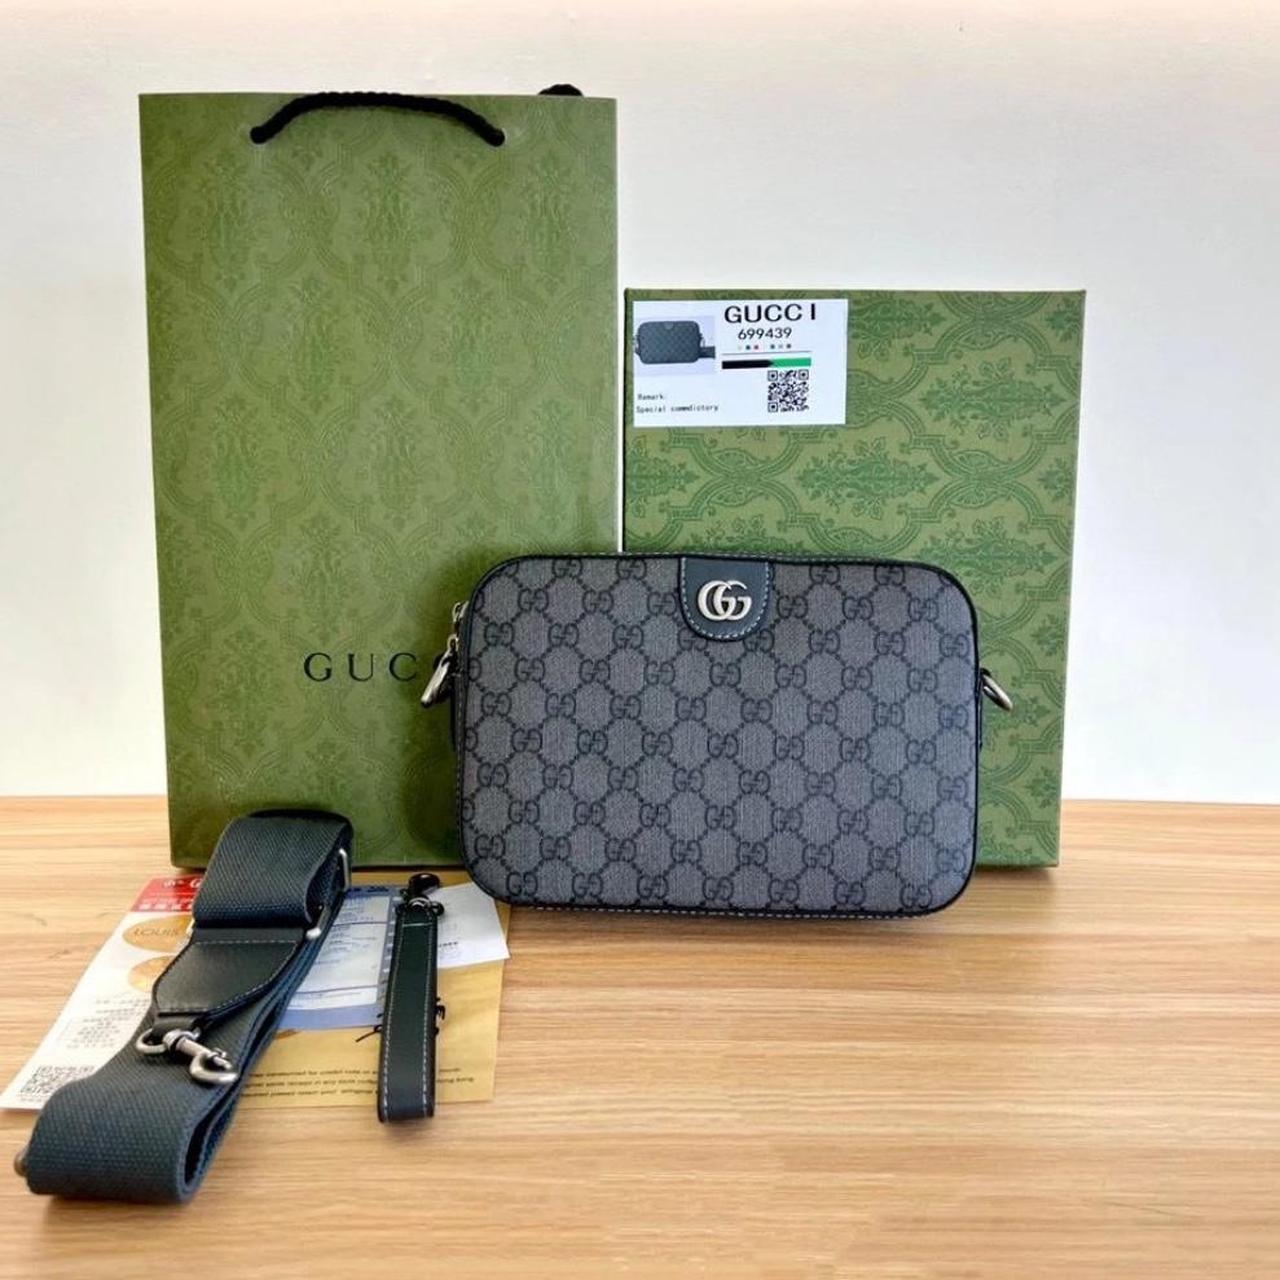 Gucci side bag 7-15 days shipping Dm before buying - Depop